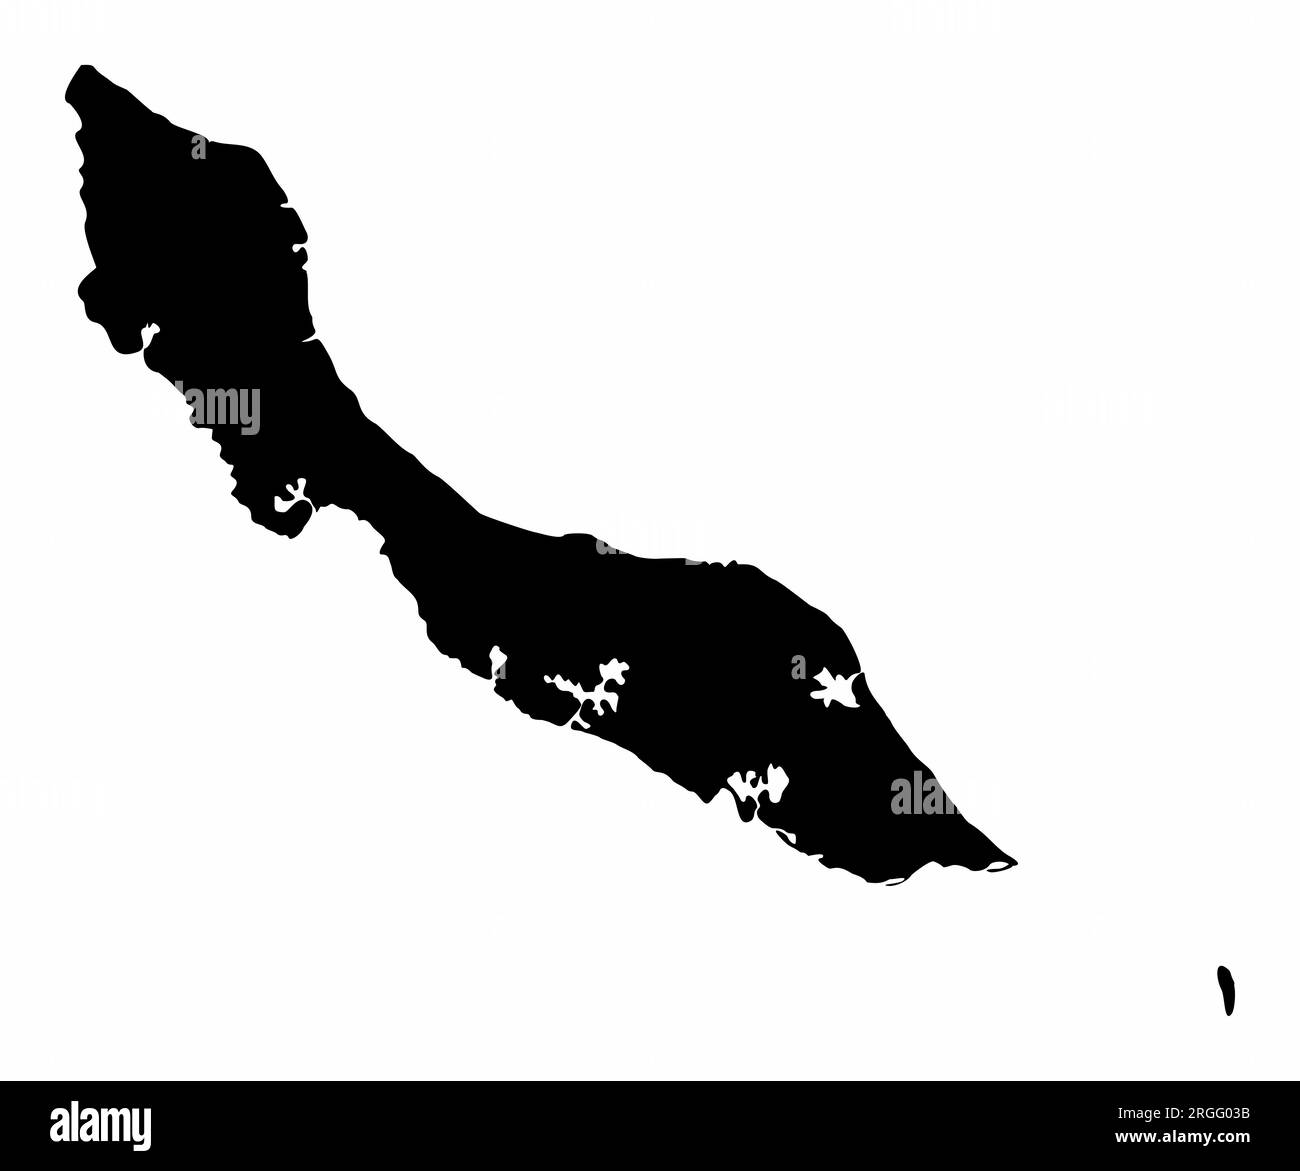 Curacao Island map silhouette isolated on white background Stock Vector